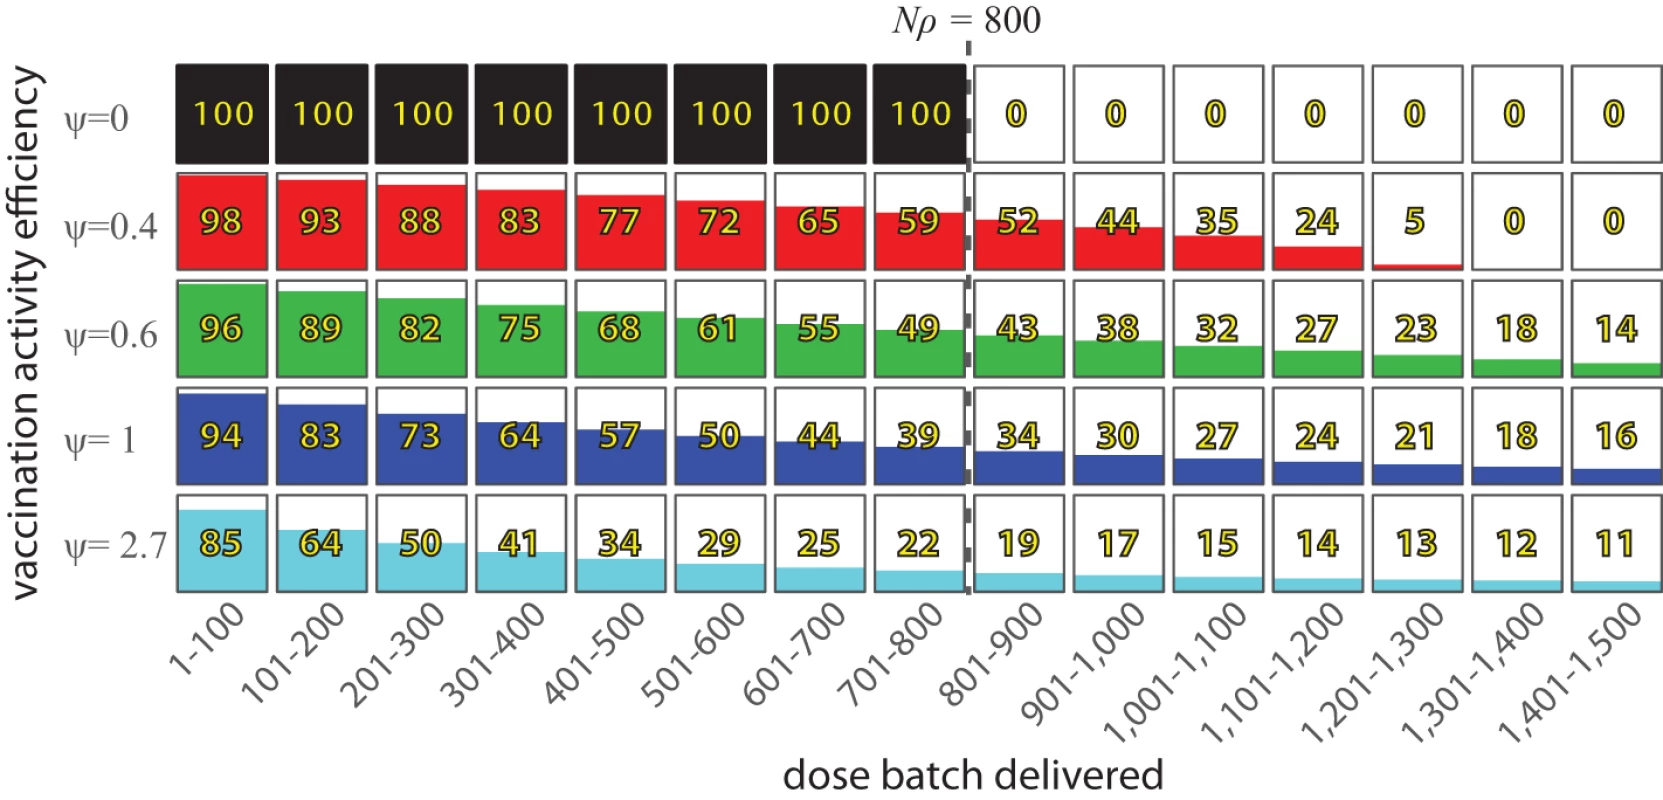 The expected number of additional people vaccinated in a vaccination activity per batch of 100 vaccine doses delivered, in a hypothetical population of 1,000 individuals where ρ = 0.8.